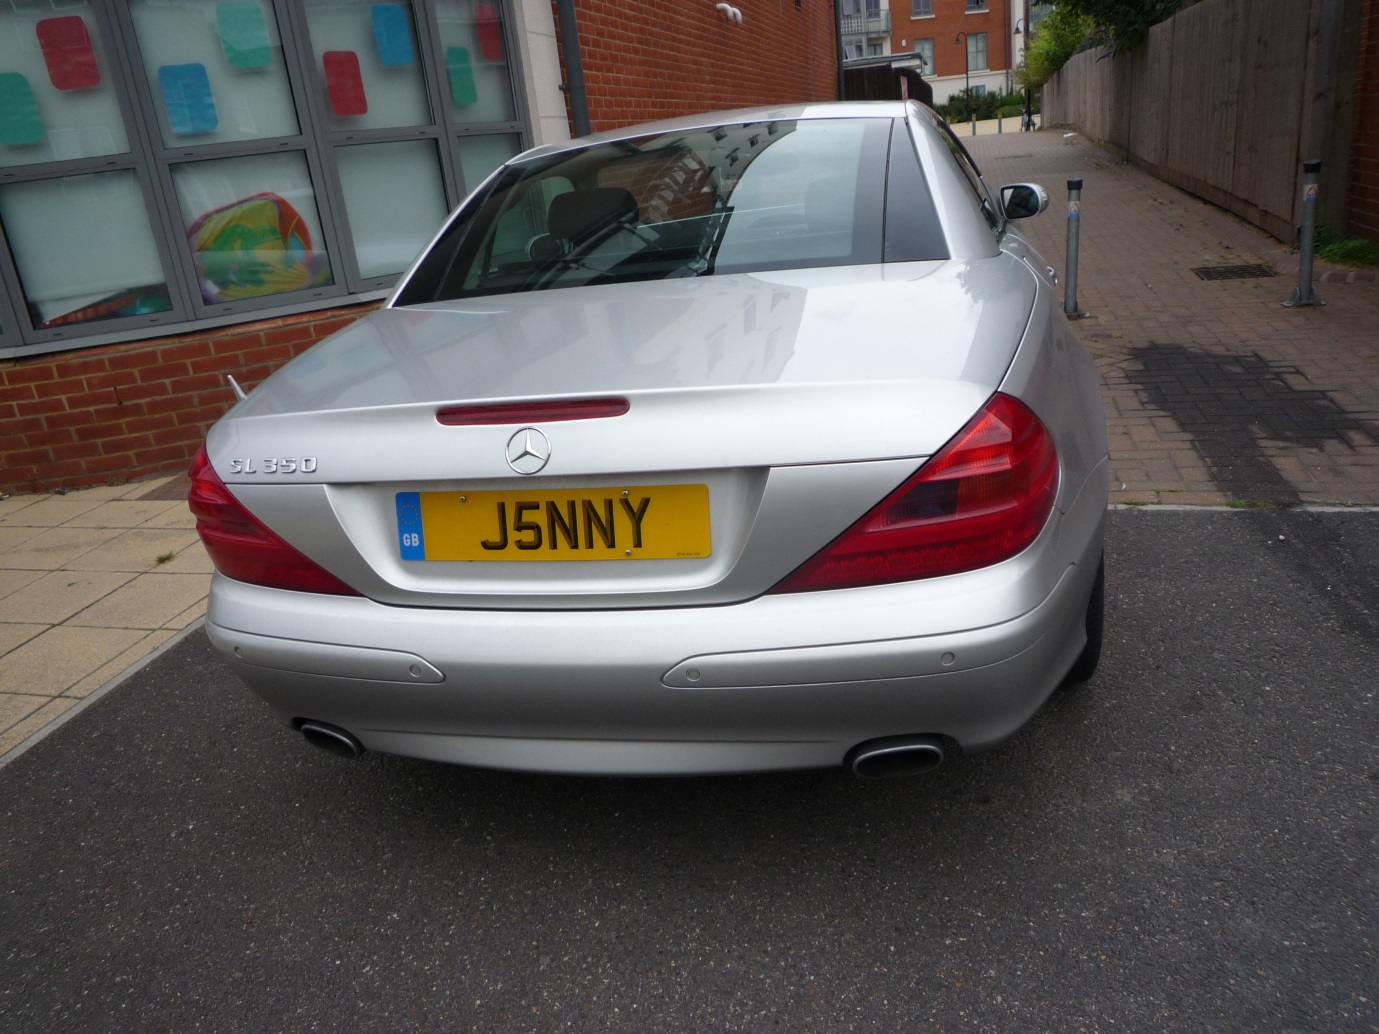 How Much Is A Personalised Number Plate